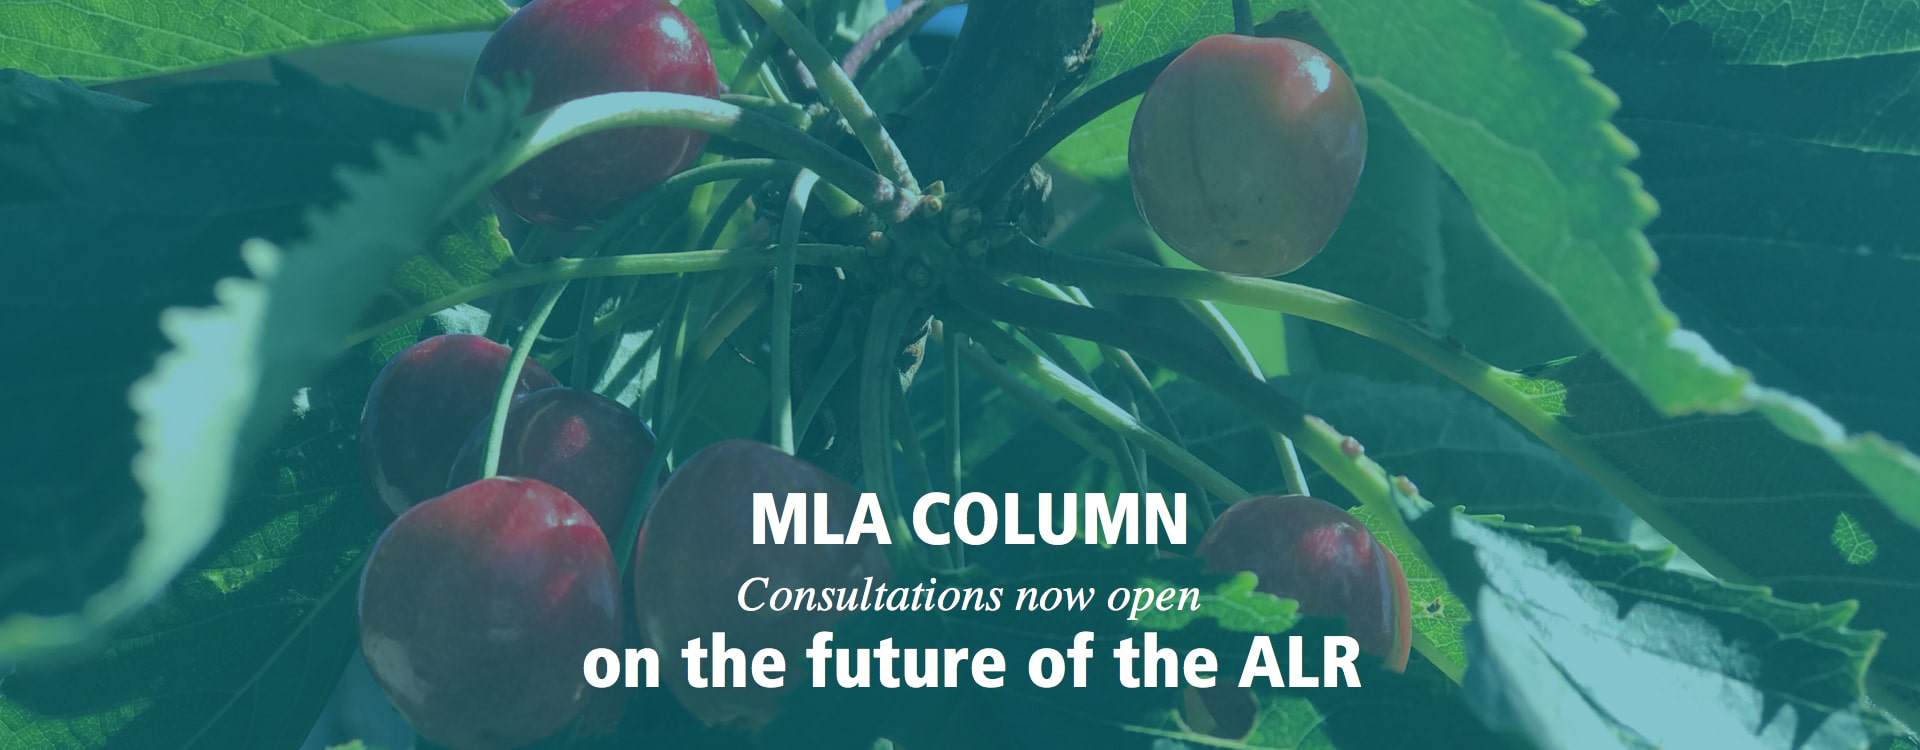 Consultations now open on the future the ALR